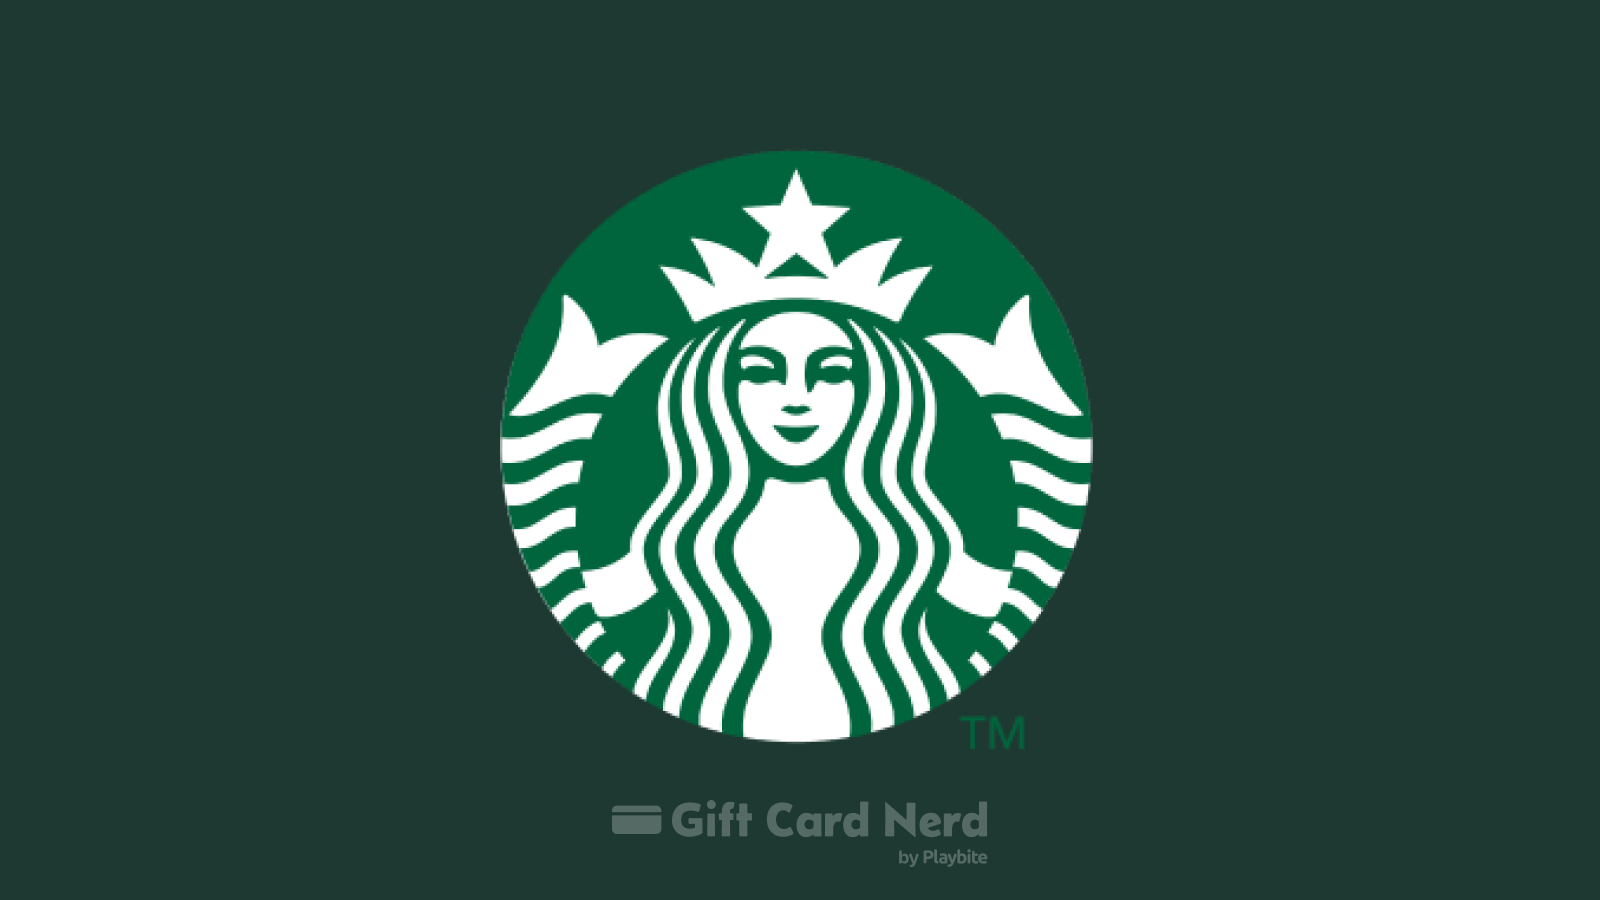 Can I Use a Starbucks Gift Card on DoorDash?